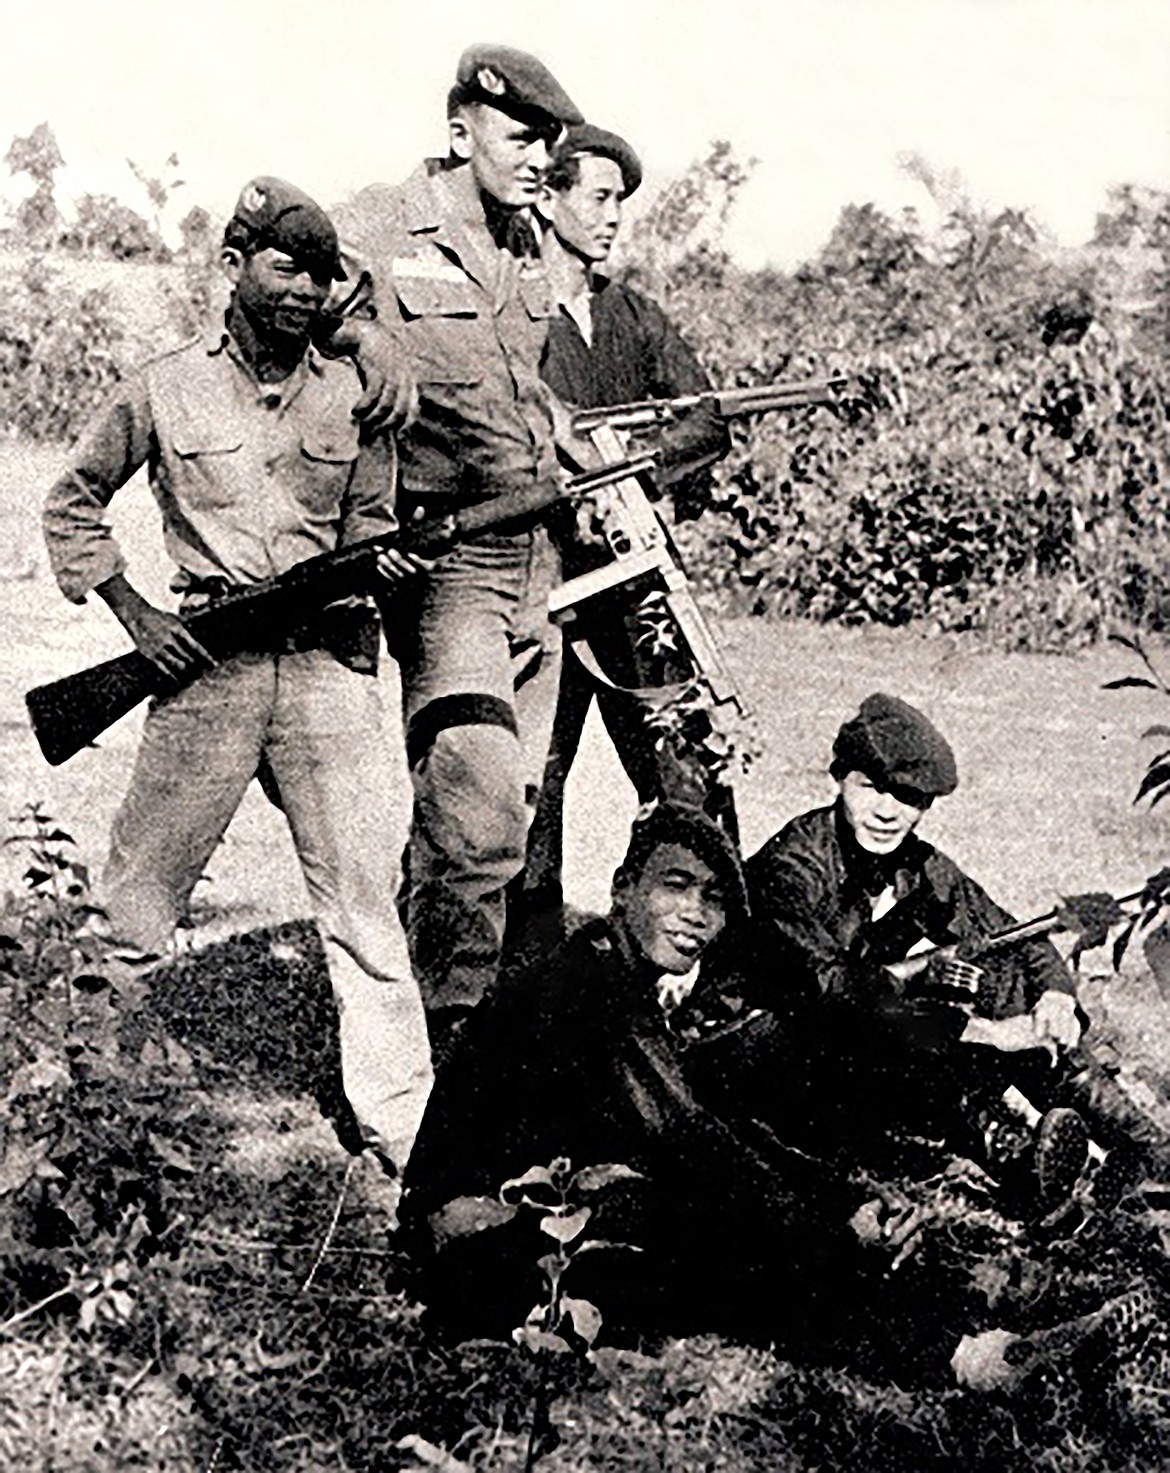 Sergeant Bill Hunt in 1964 working with South Vietnamese Rangers during his second tour